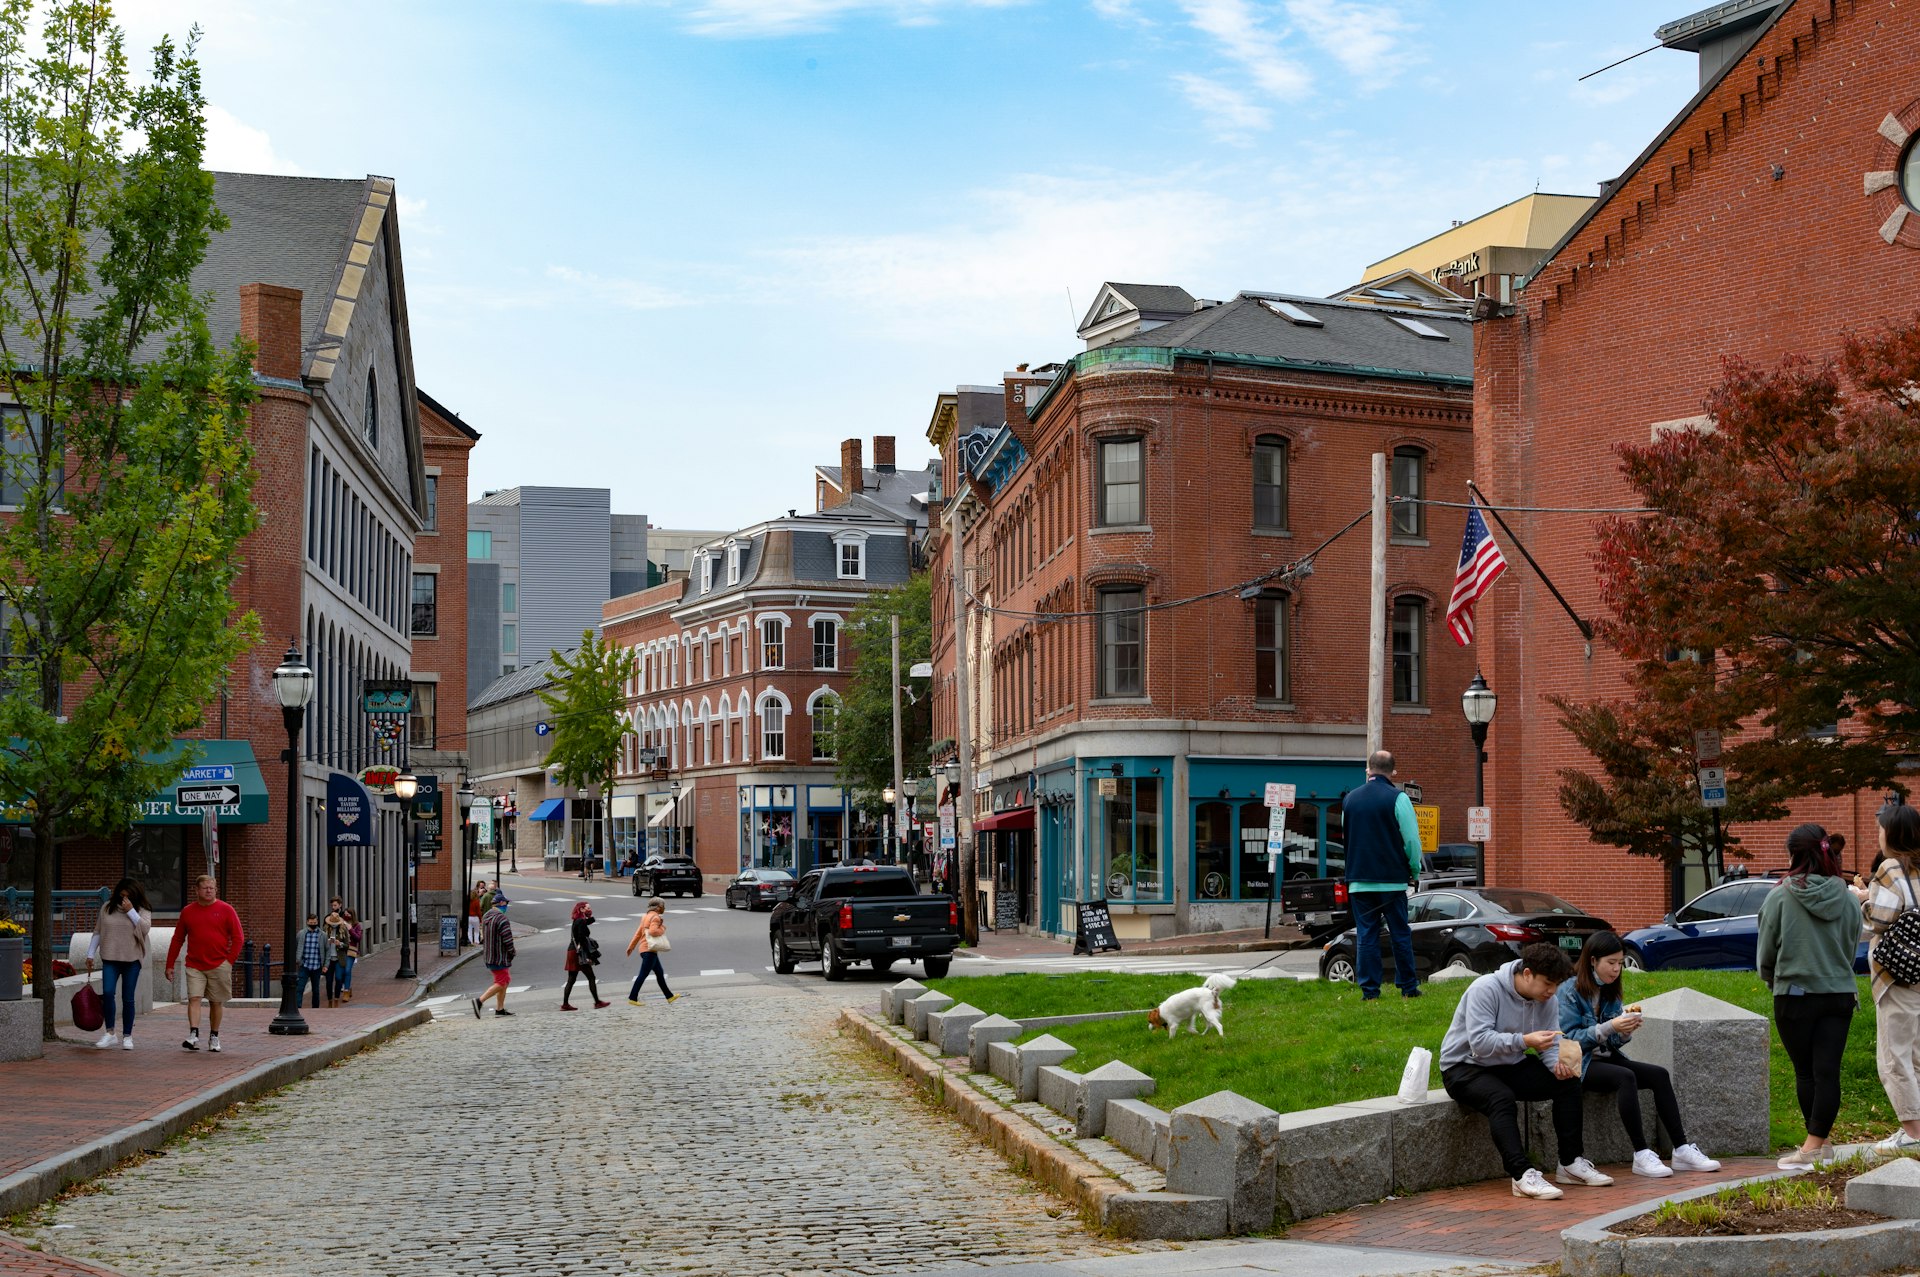 People walking and hanging out in Portland, Maine's Historic Waterfront District with cobblestone streets and red brick buildings.